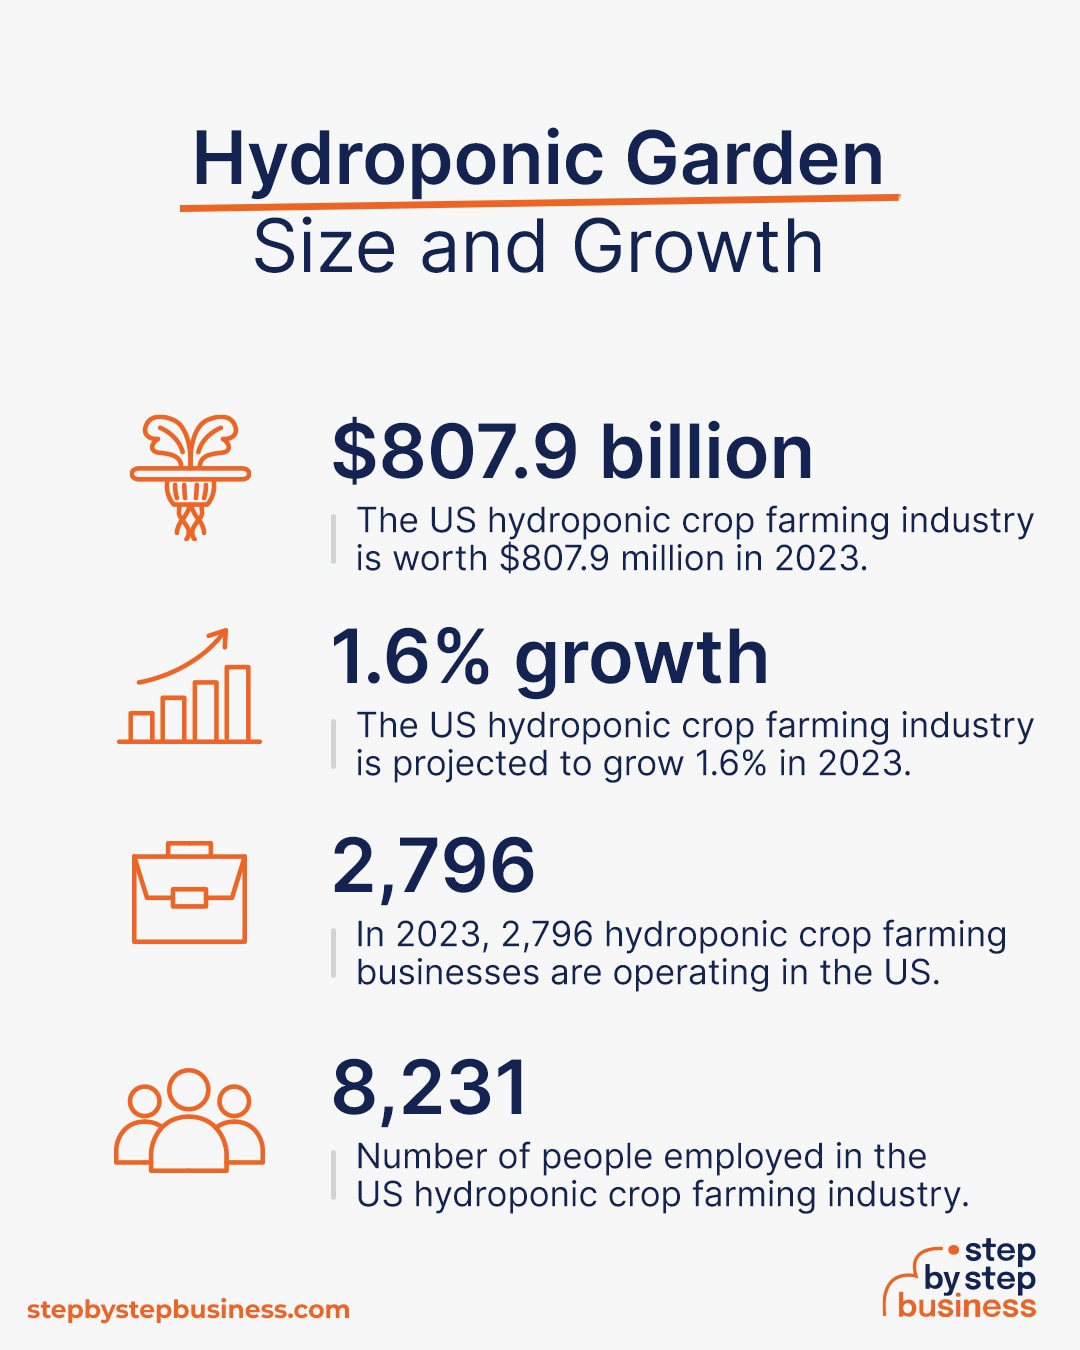 Hydroponic market size and growth